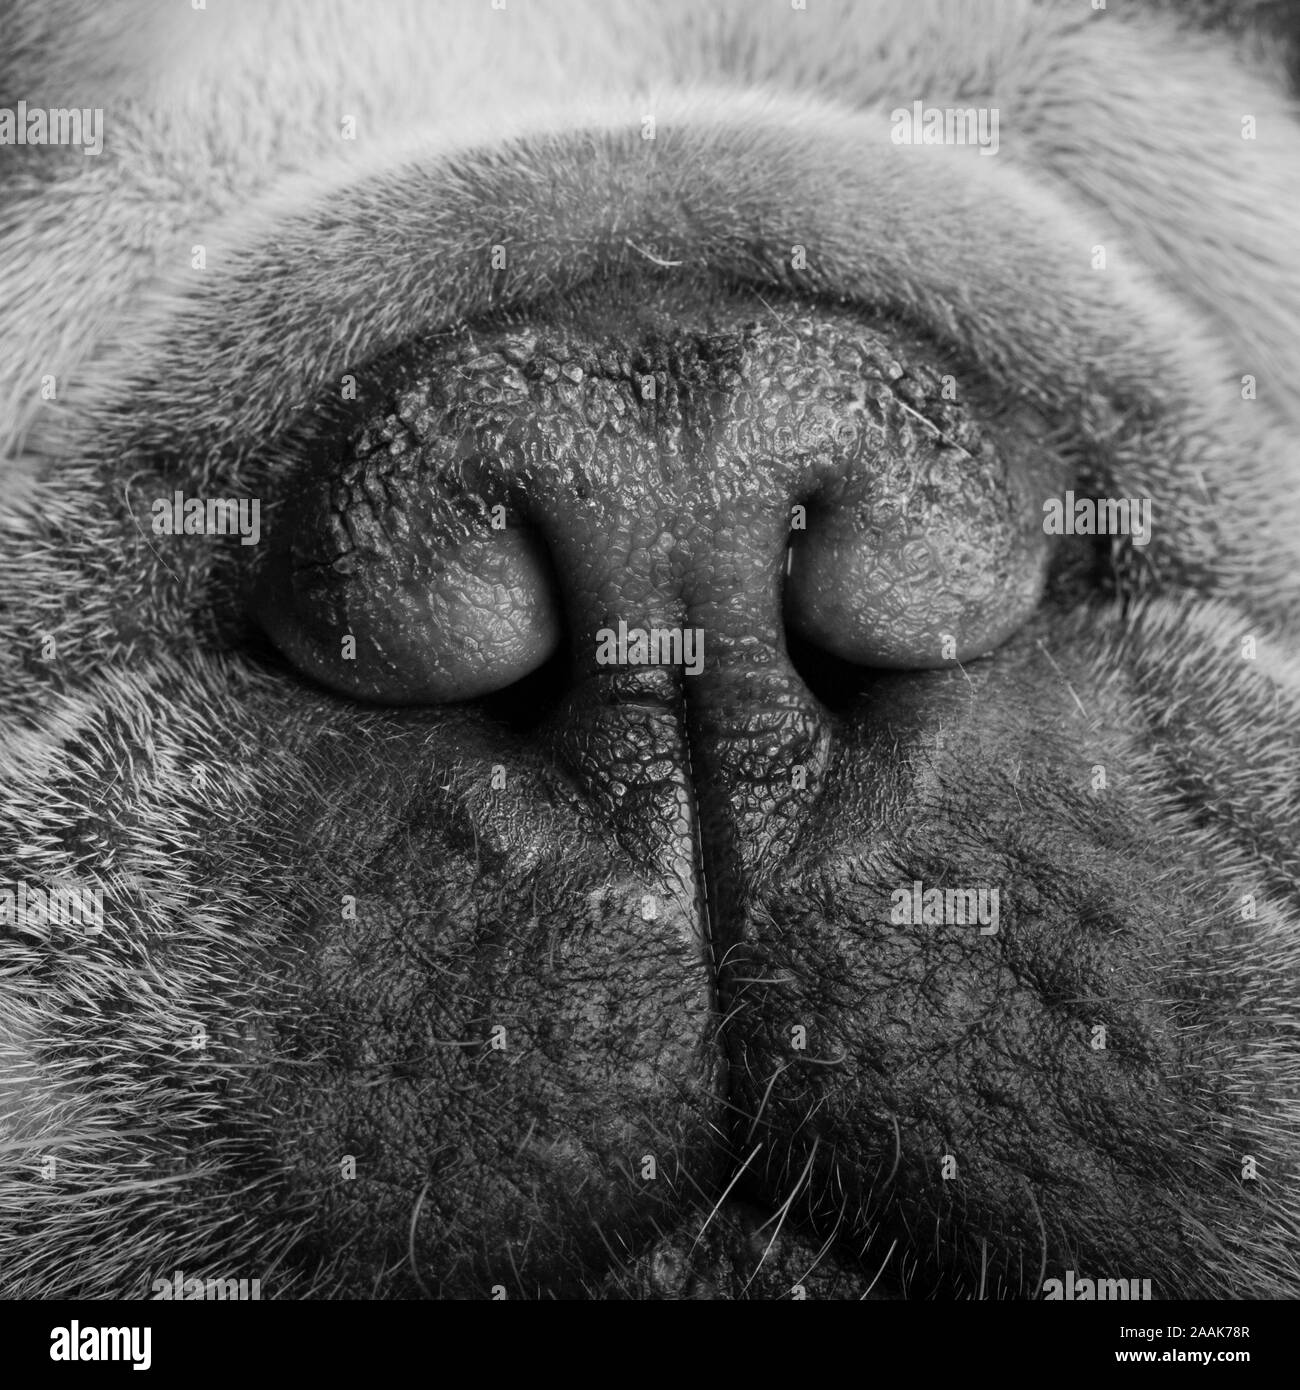 Close-up of French Bulldogs nose Stock Photo